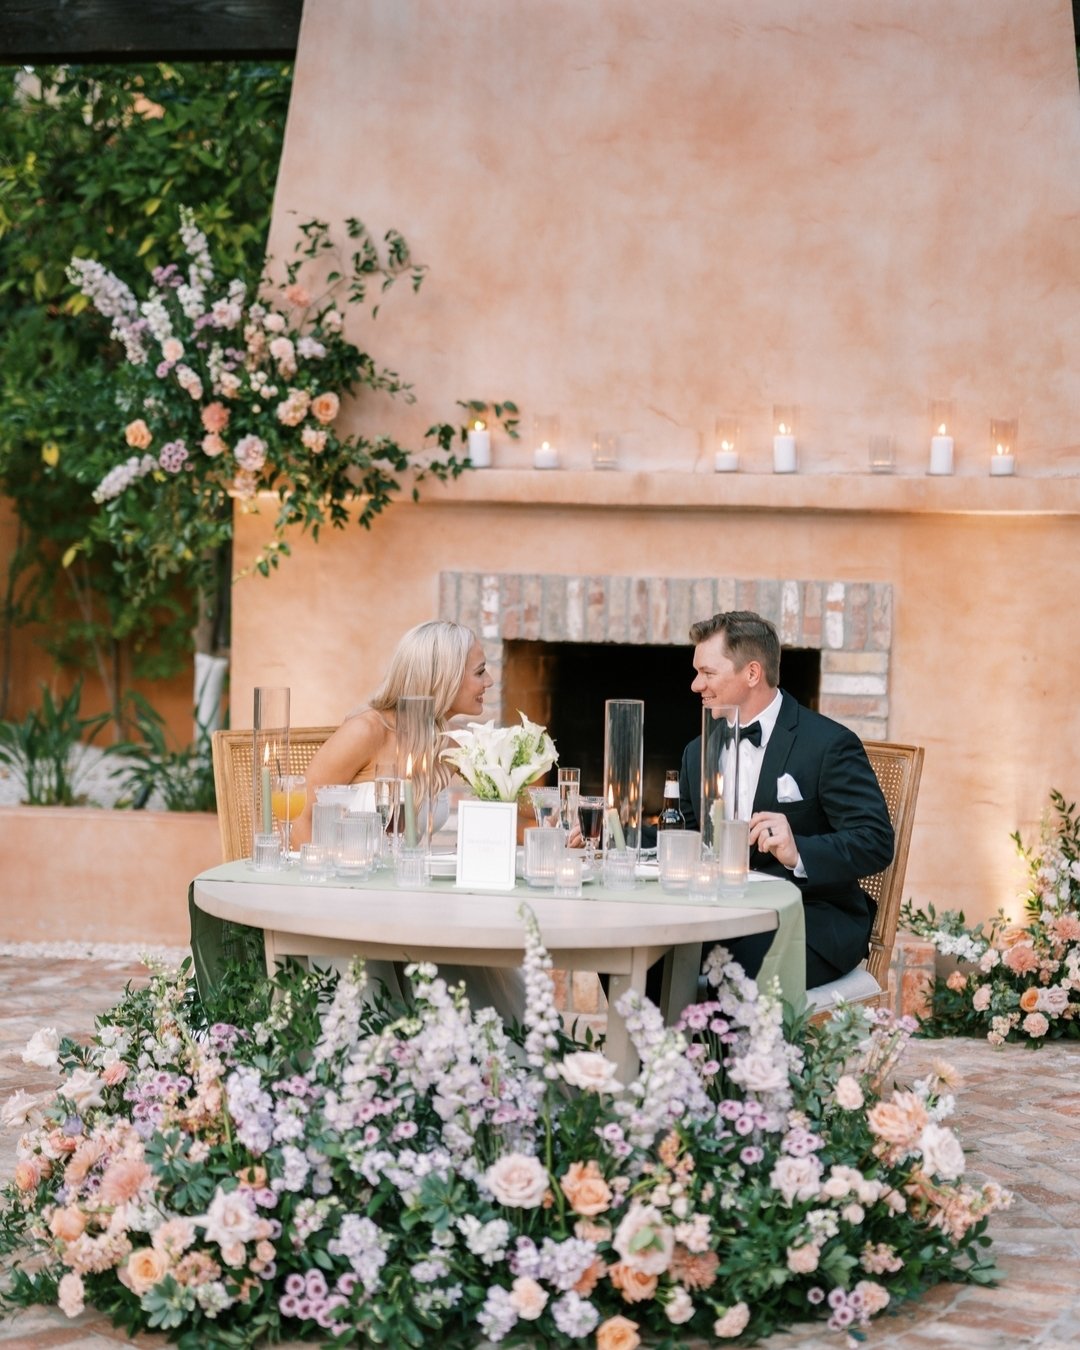 The sweetheart table of our dreams 💭 featuring our Atticus Dining Table and Ashley Dining Chairs
&bull;
Planning &amp; Design: @events_by_paris @reema_eventsbyparis
Venue: @royalpalmshotel @royalpalmsweddings
Photography: @tashabradyphoto
Beauty: @c